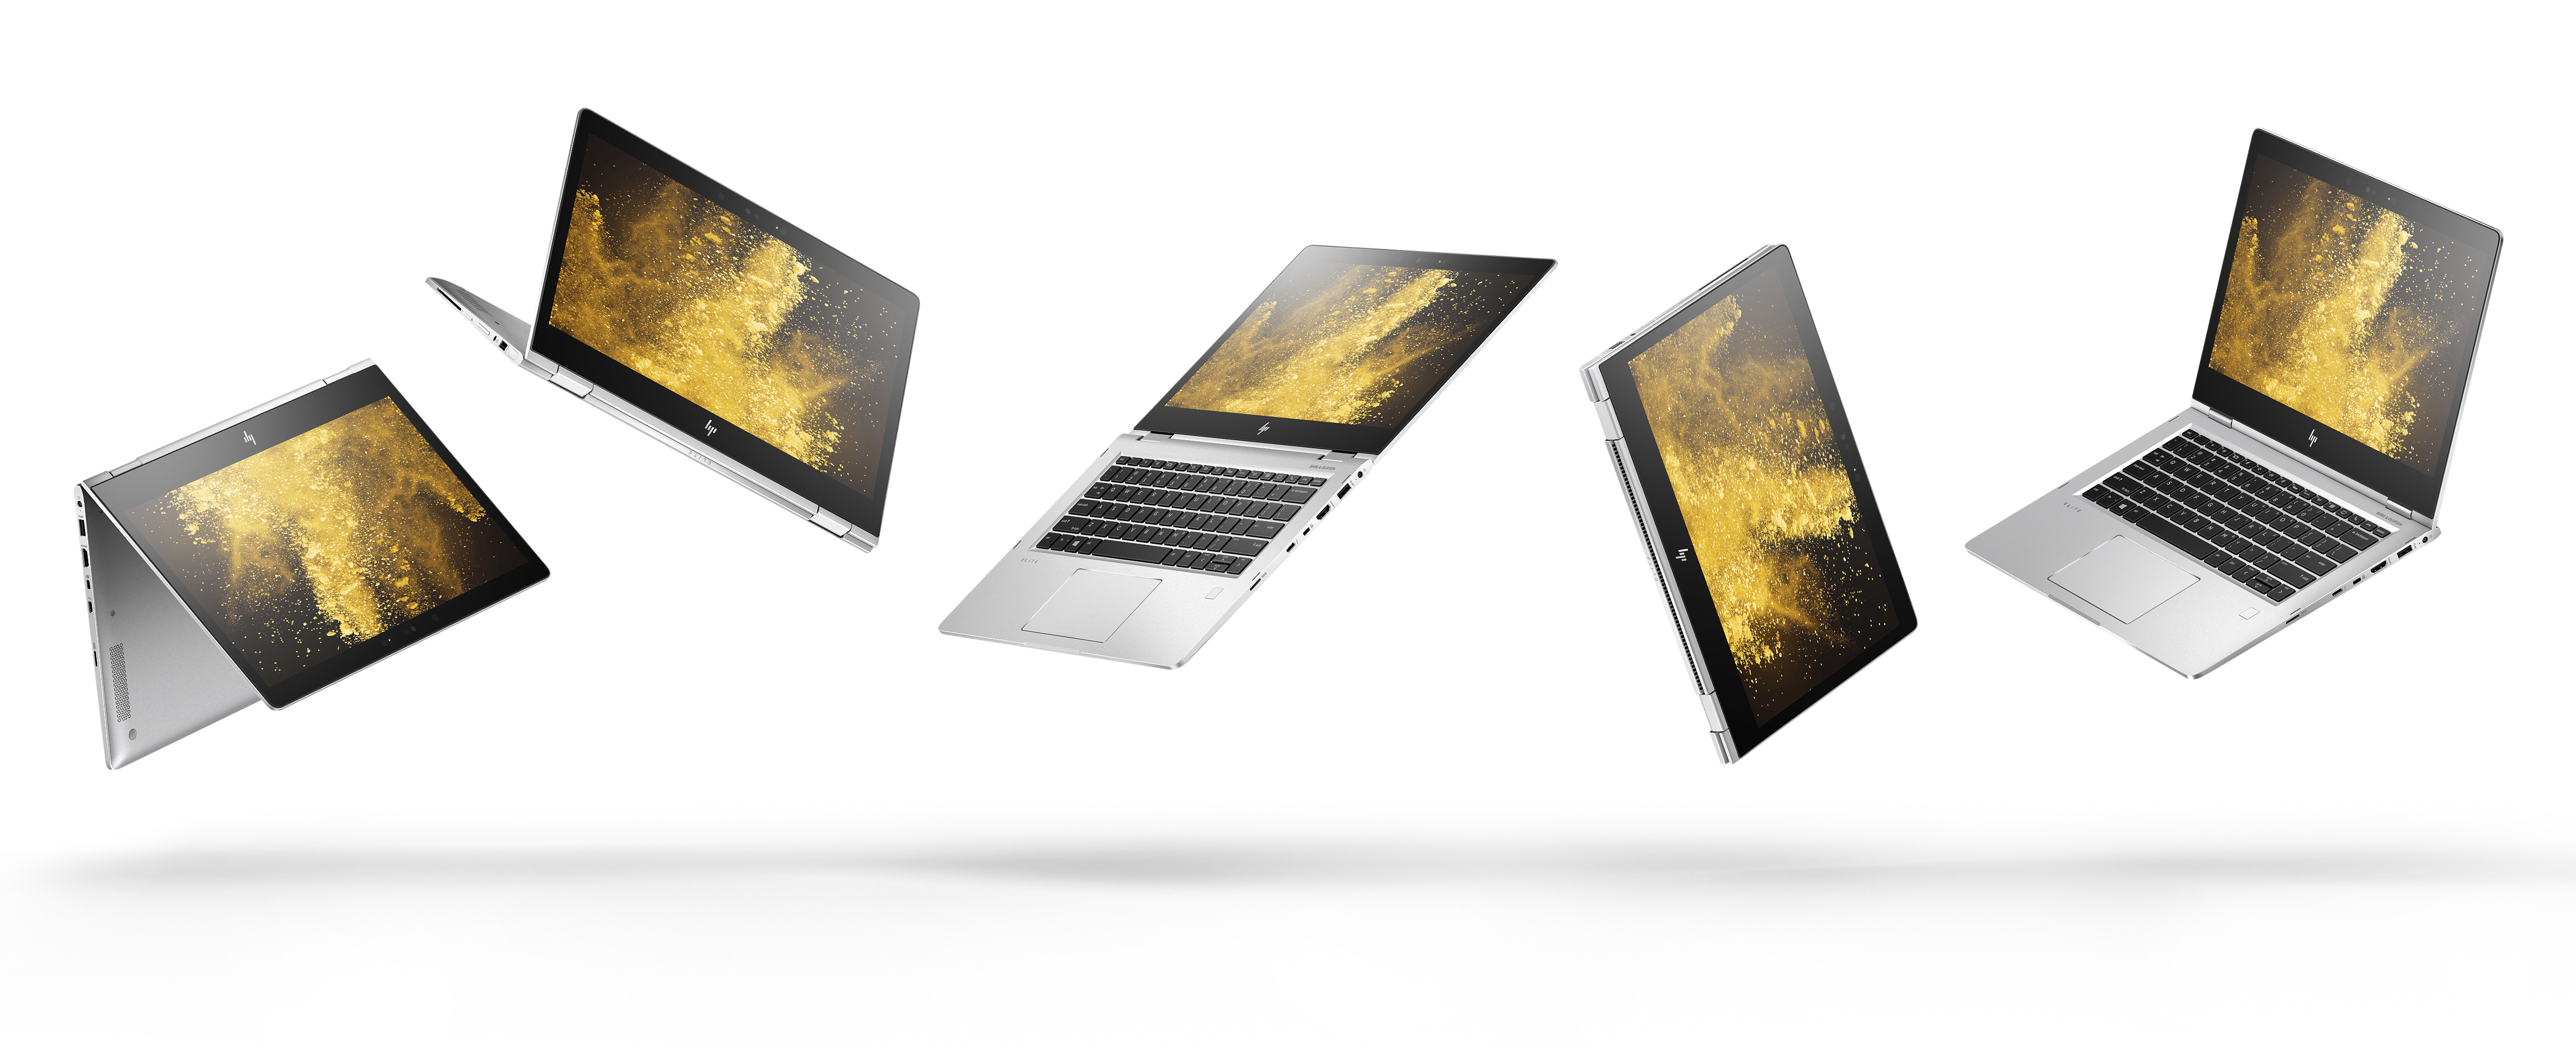 Redesigned premium PCs powered by Windows 10